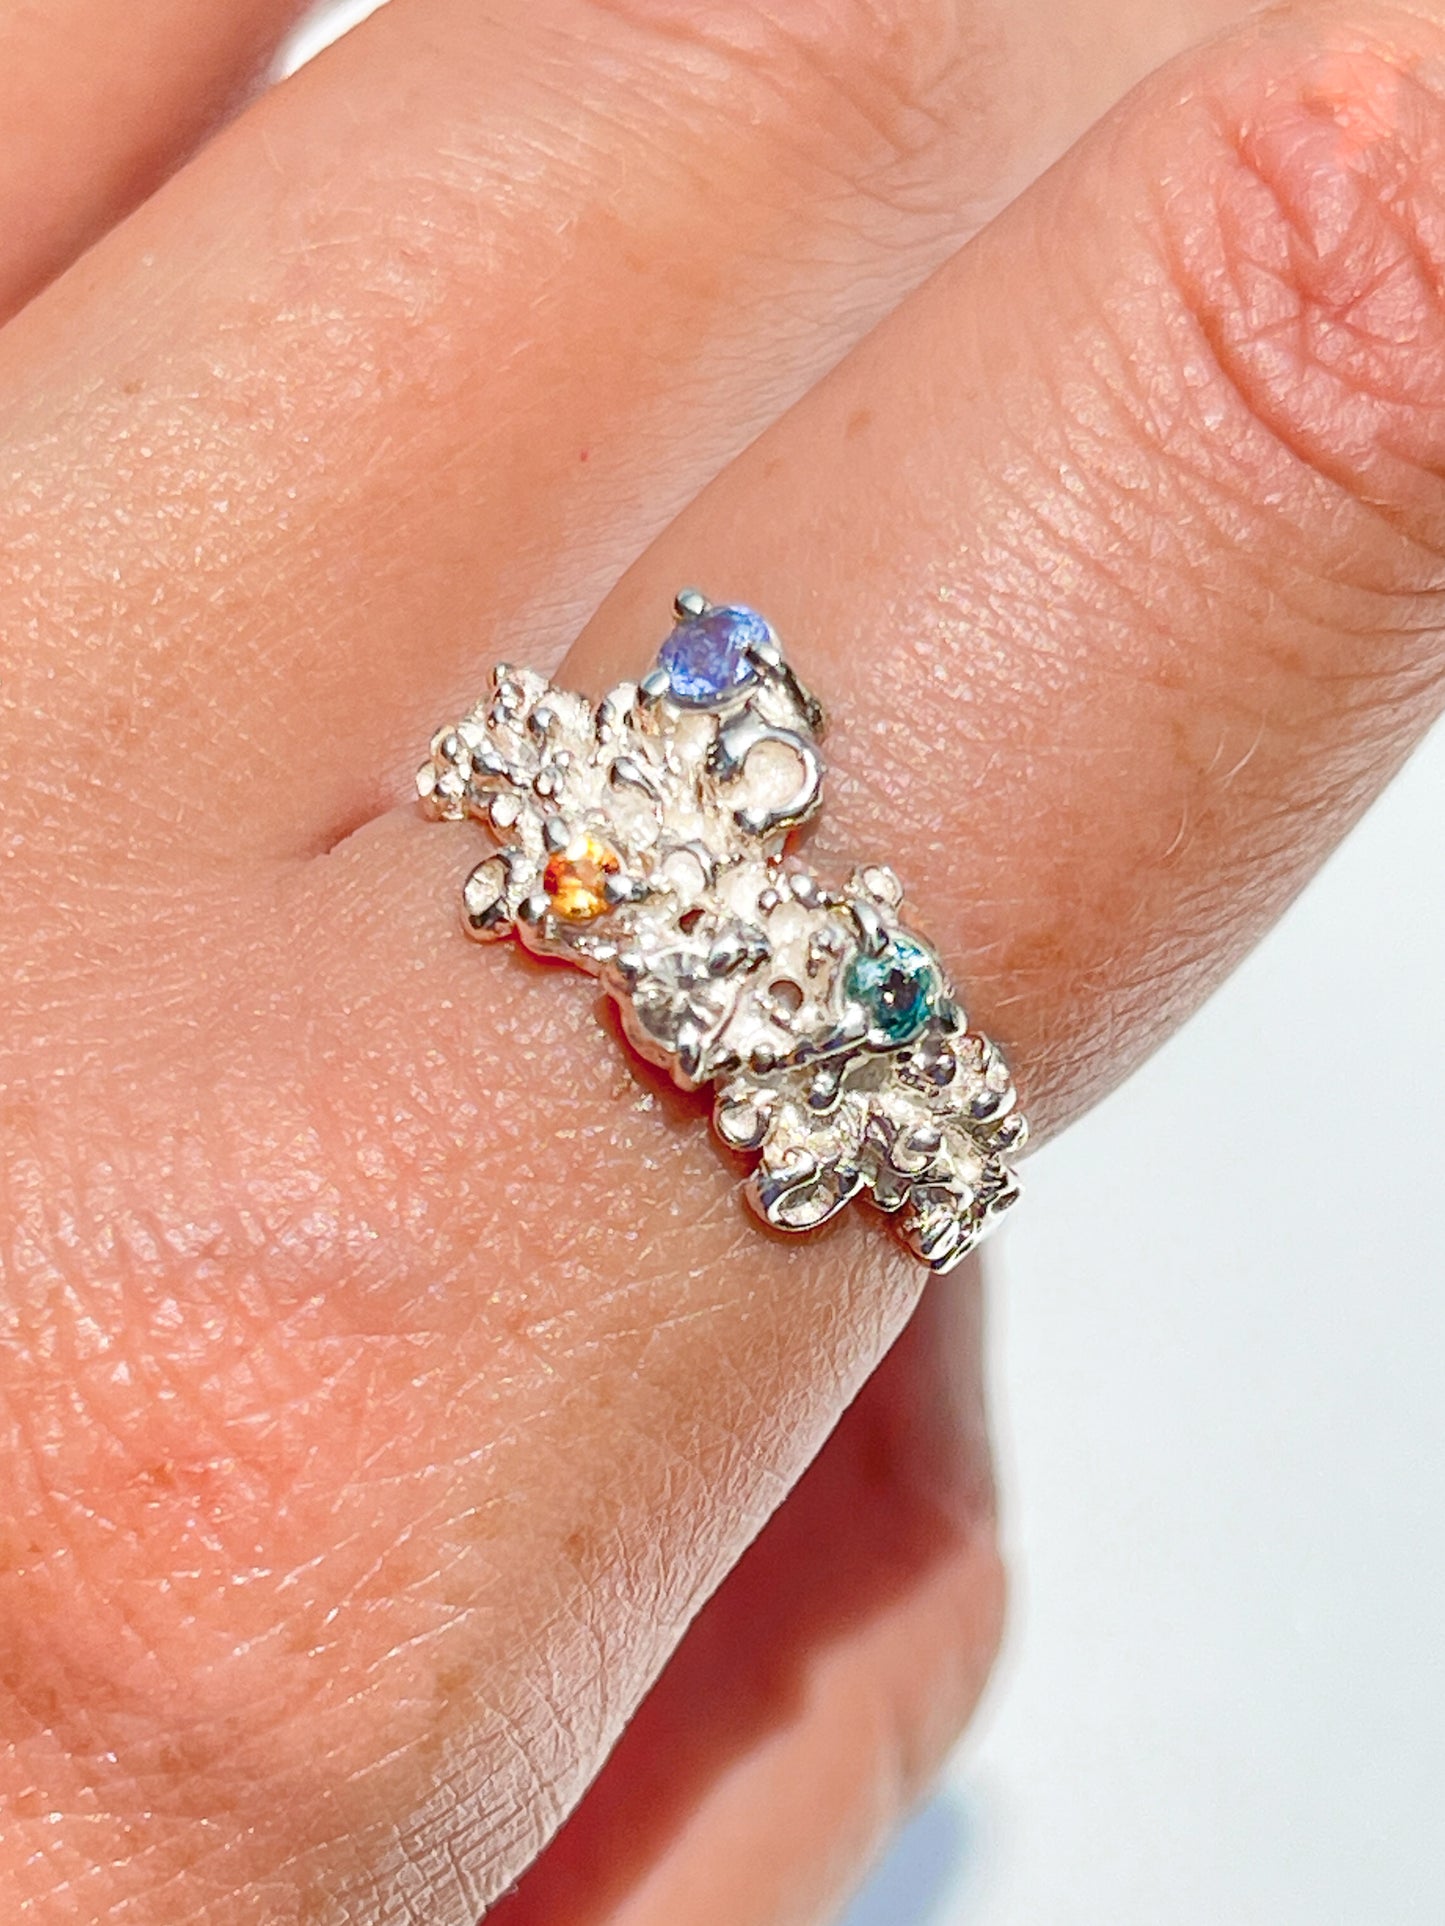 Coral Ring Silver with Blue, Green, Orange & White Sapphires  - size 7.5